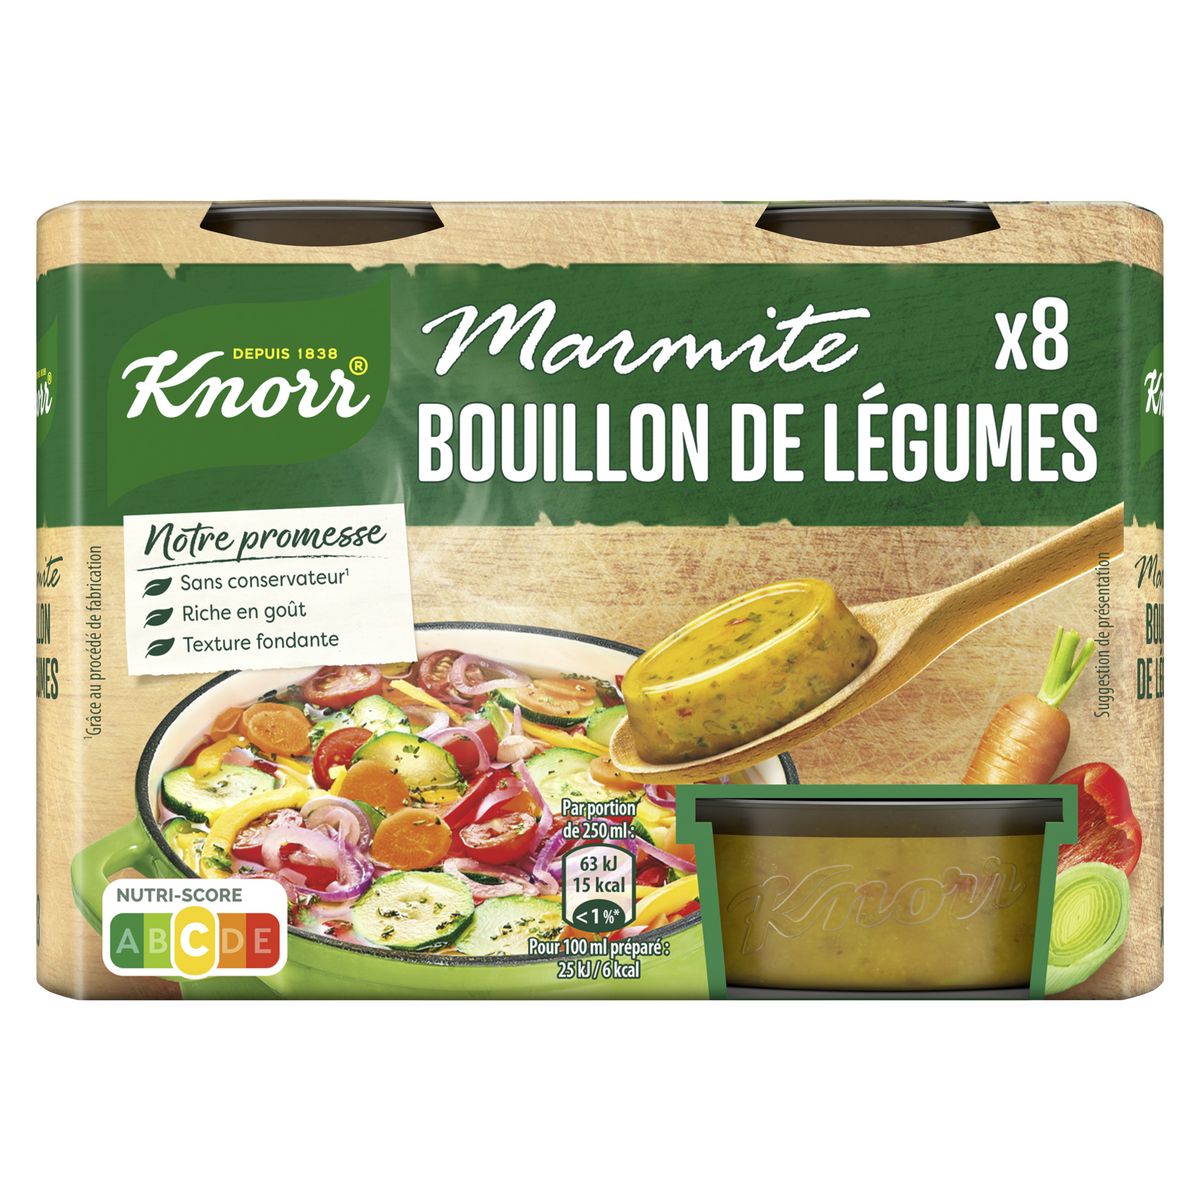 Knorr Vegetable Stock Pot | Buy Online | My French Grocery